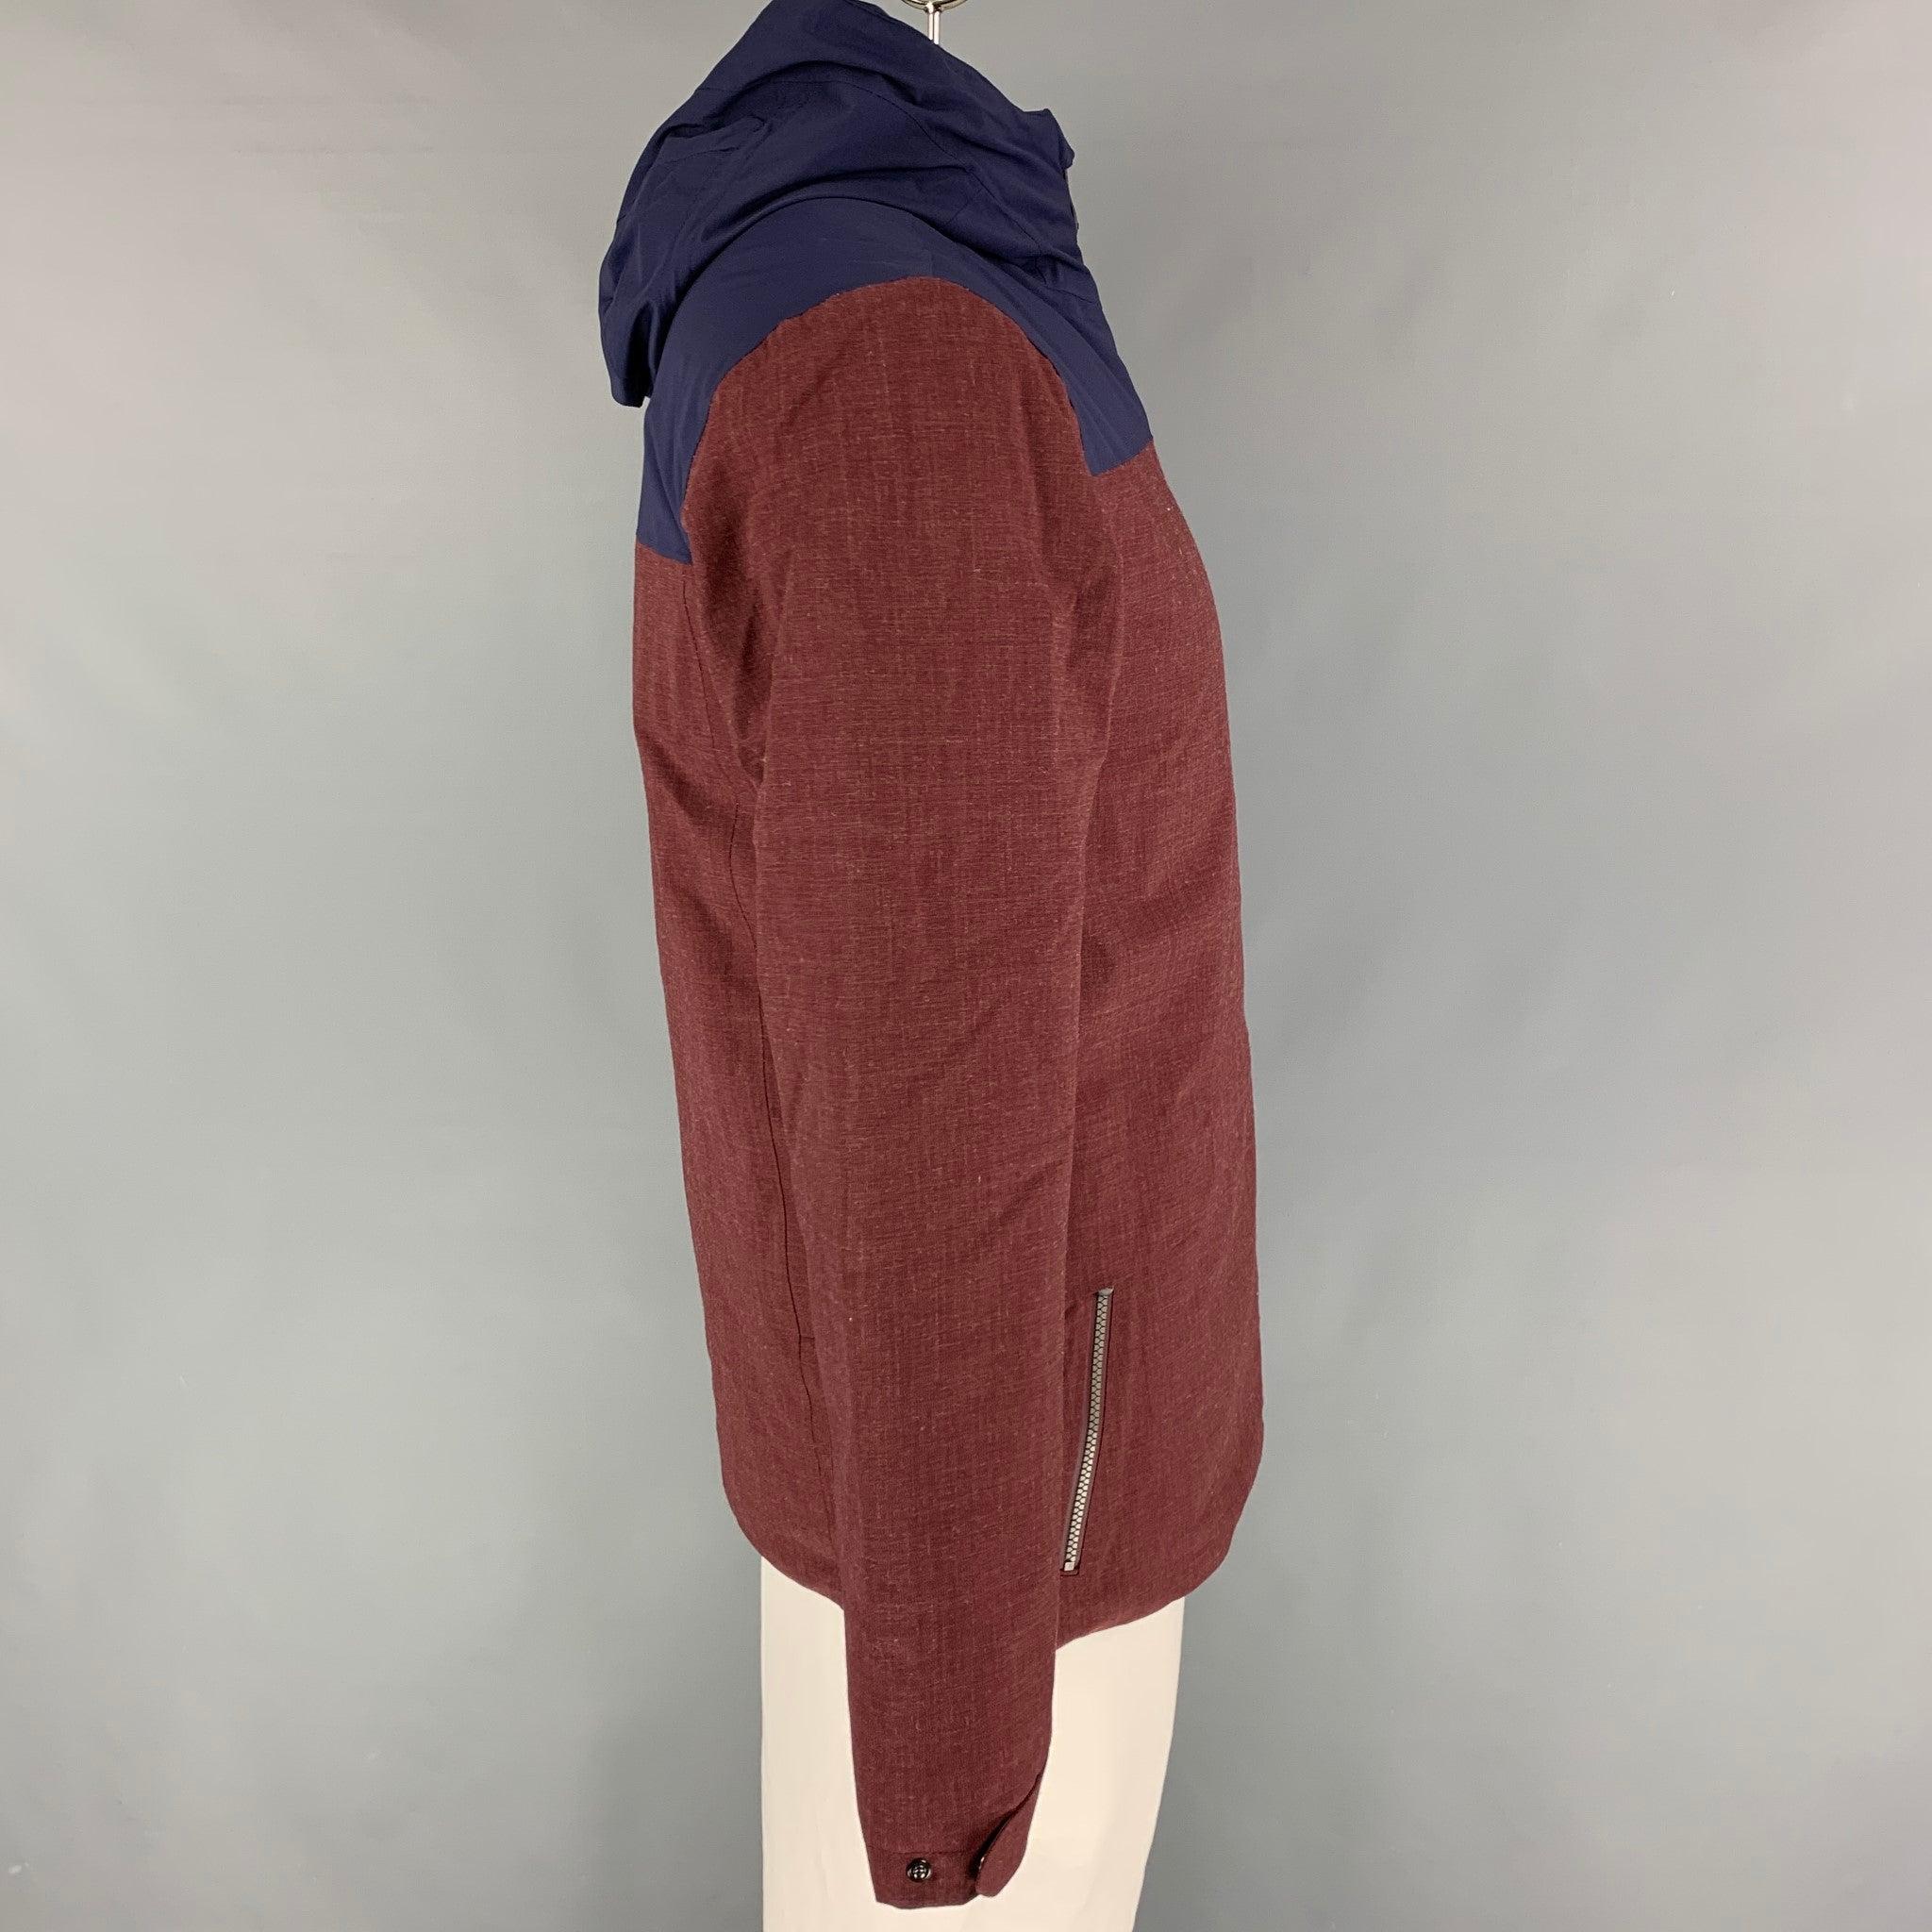 KJUS 'Zermatt' jacket comes in a burgundy & navy color block polyester / wool featuring a hooded style, waterproof, zipper pockets, sleeve logo detail, and a full zip up closure.
New With Tags.
 

Marked:   50/M 

Measurements: 
 
Shoulder: 19.5